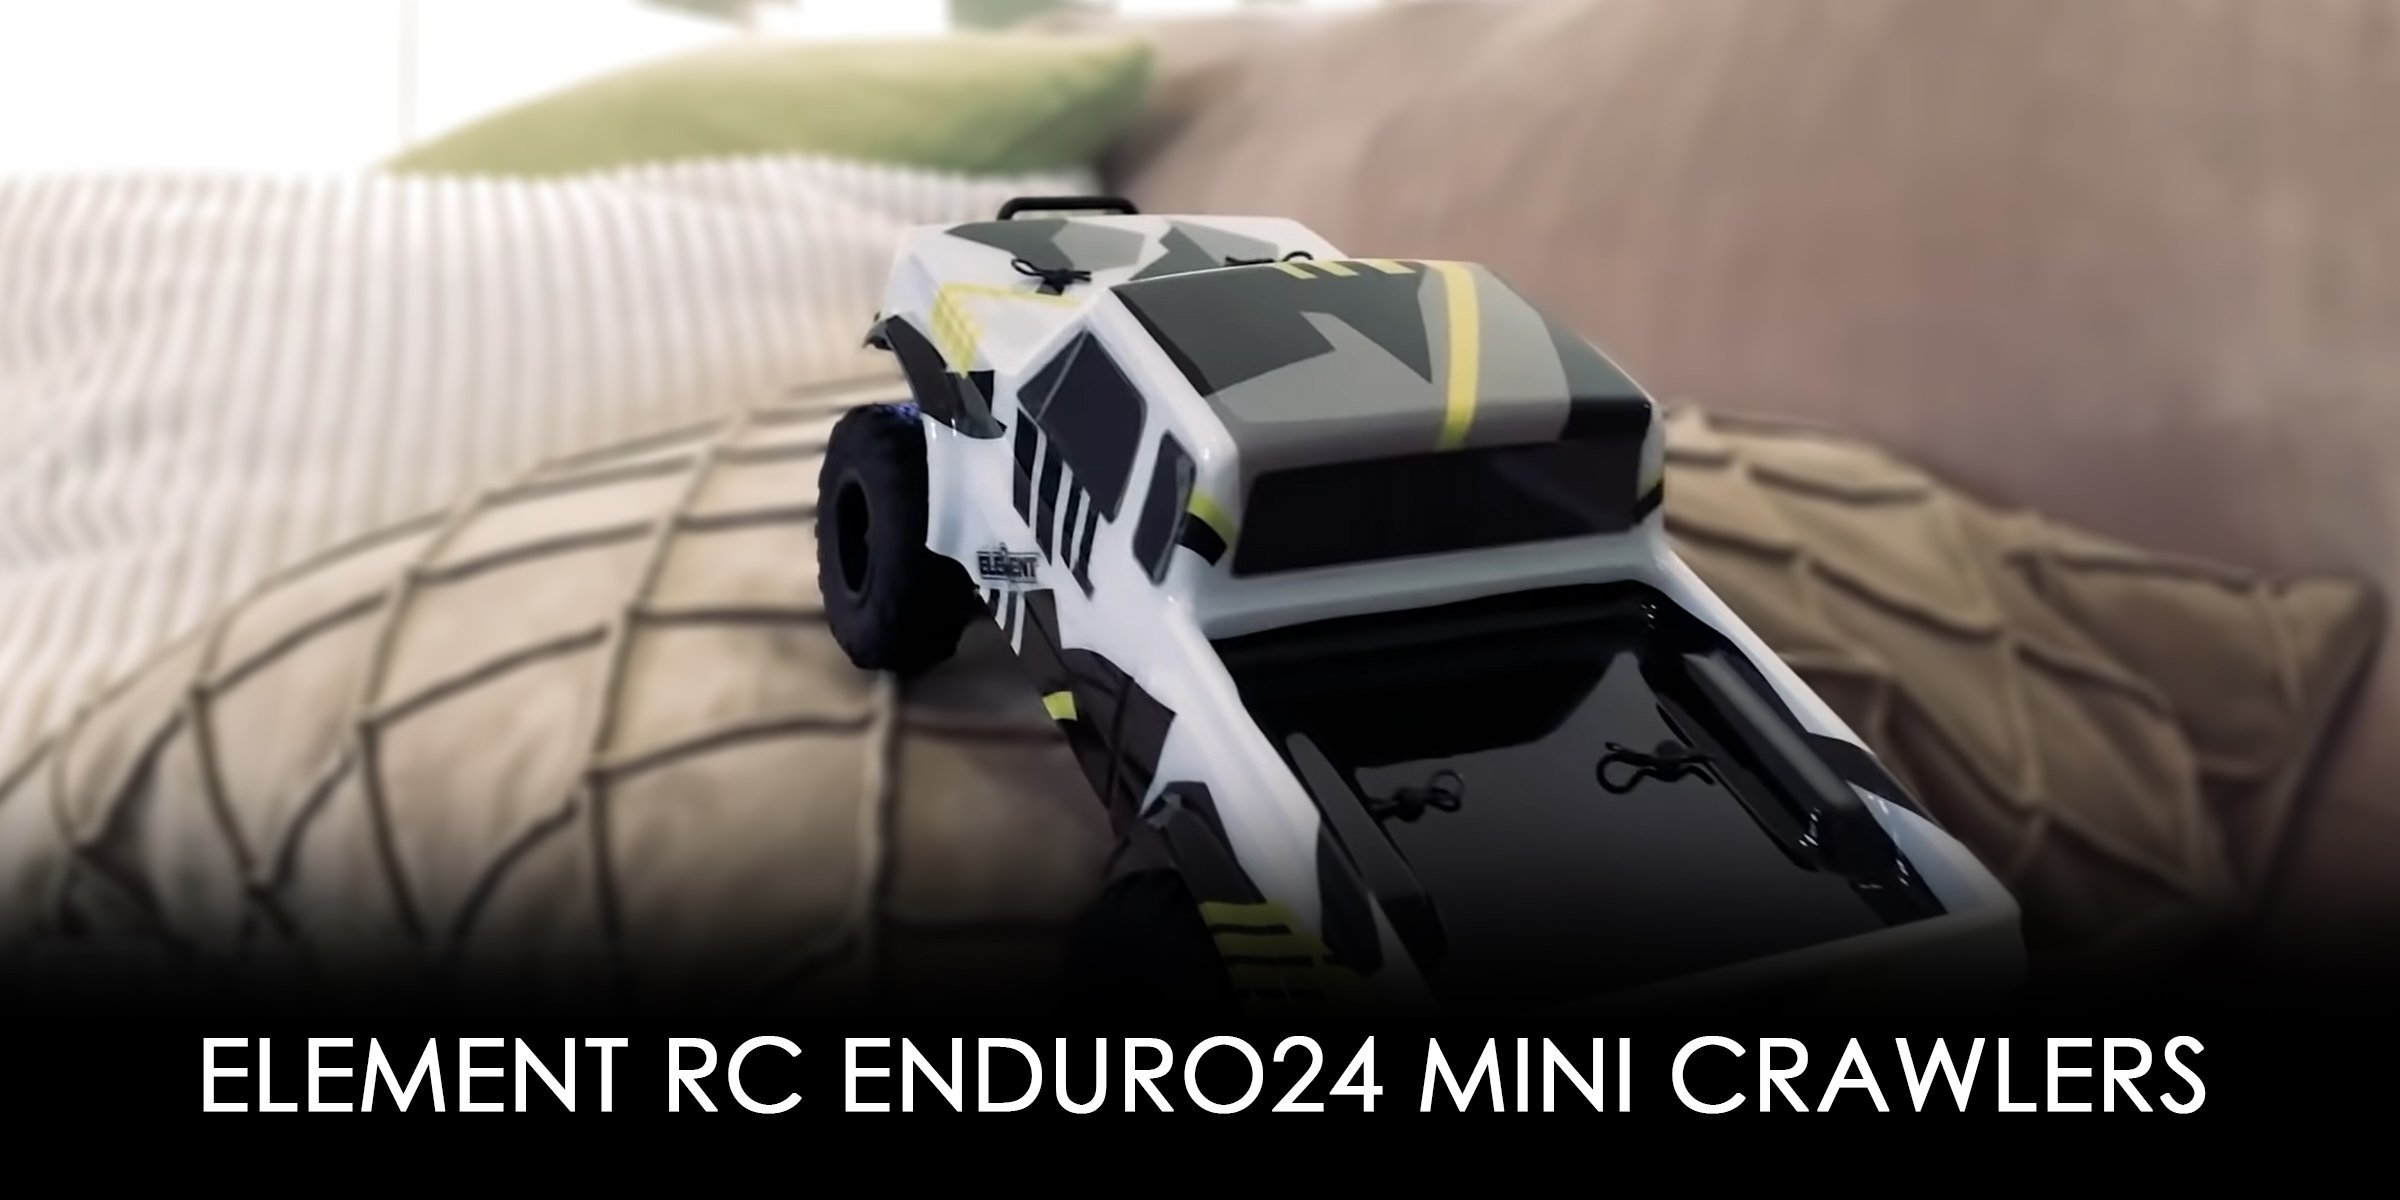 Top 10 Indoor RC Cars - #7 Element Enduro24 1:24 Scale Vehicles